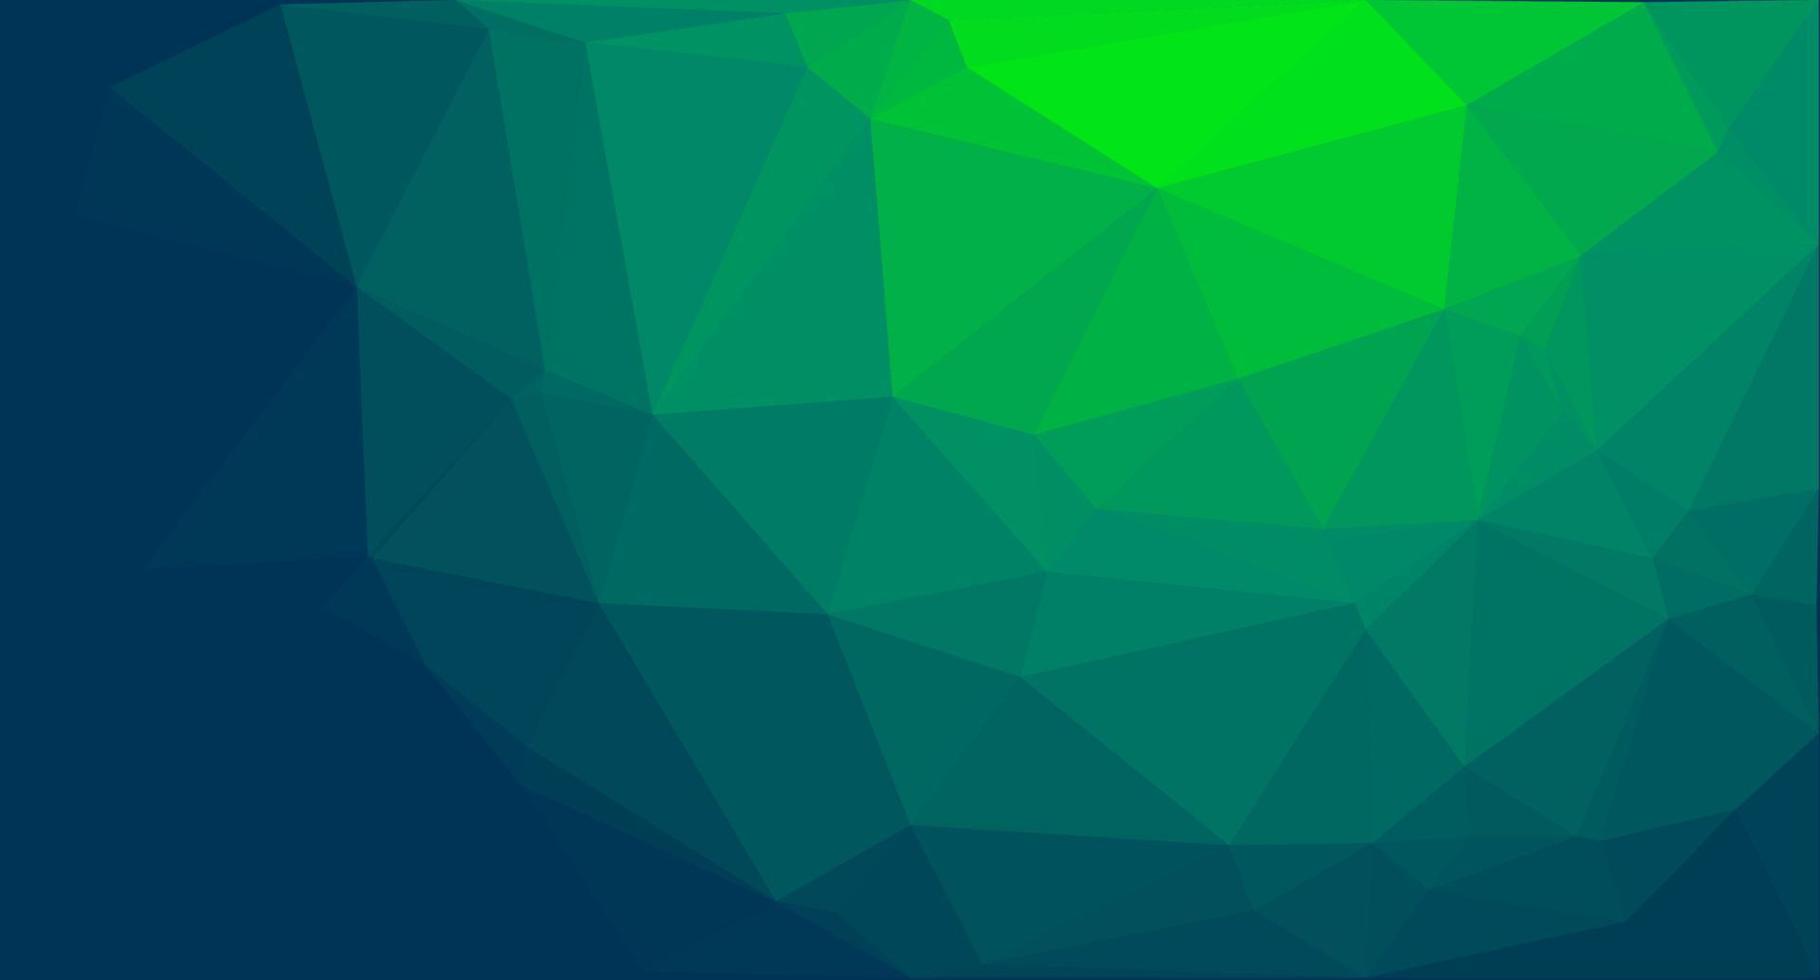 Abstract Low Polygon gradient background illustration. Low poly banner with triangle shapes vector